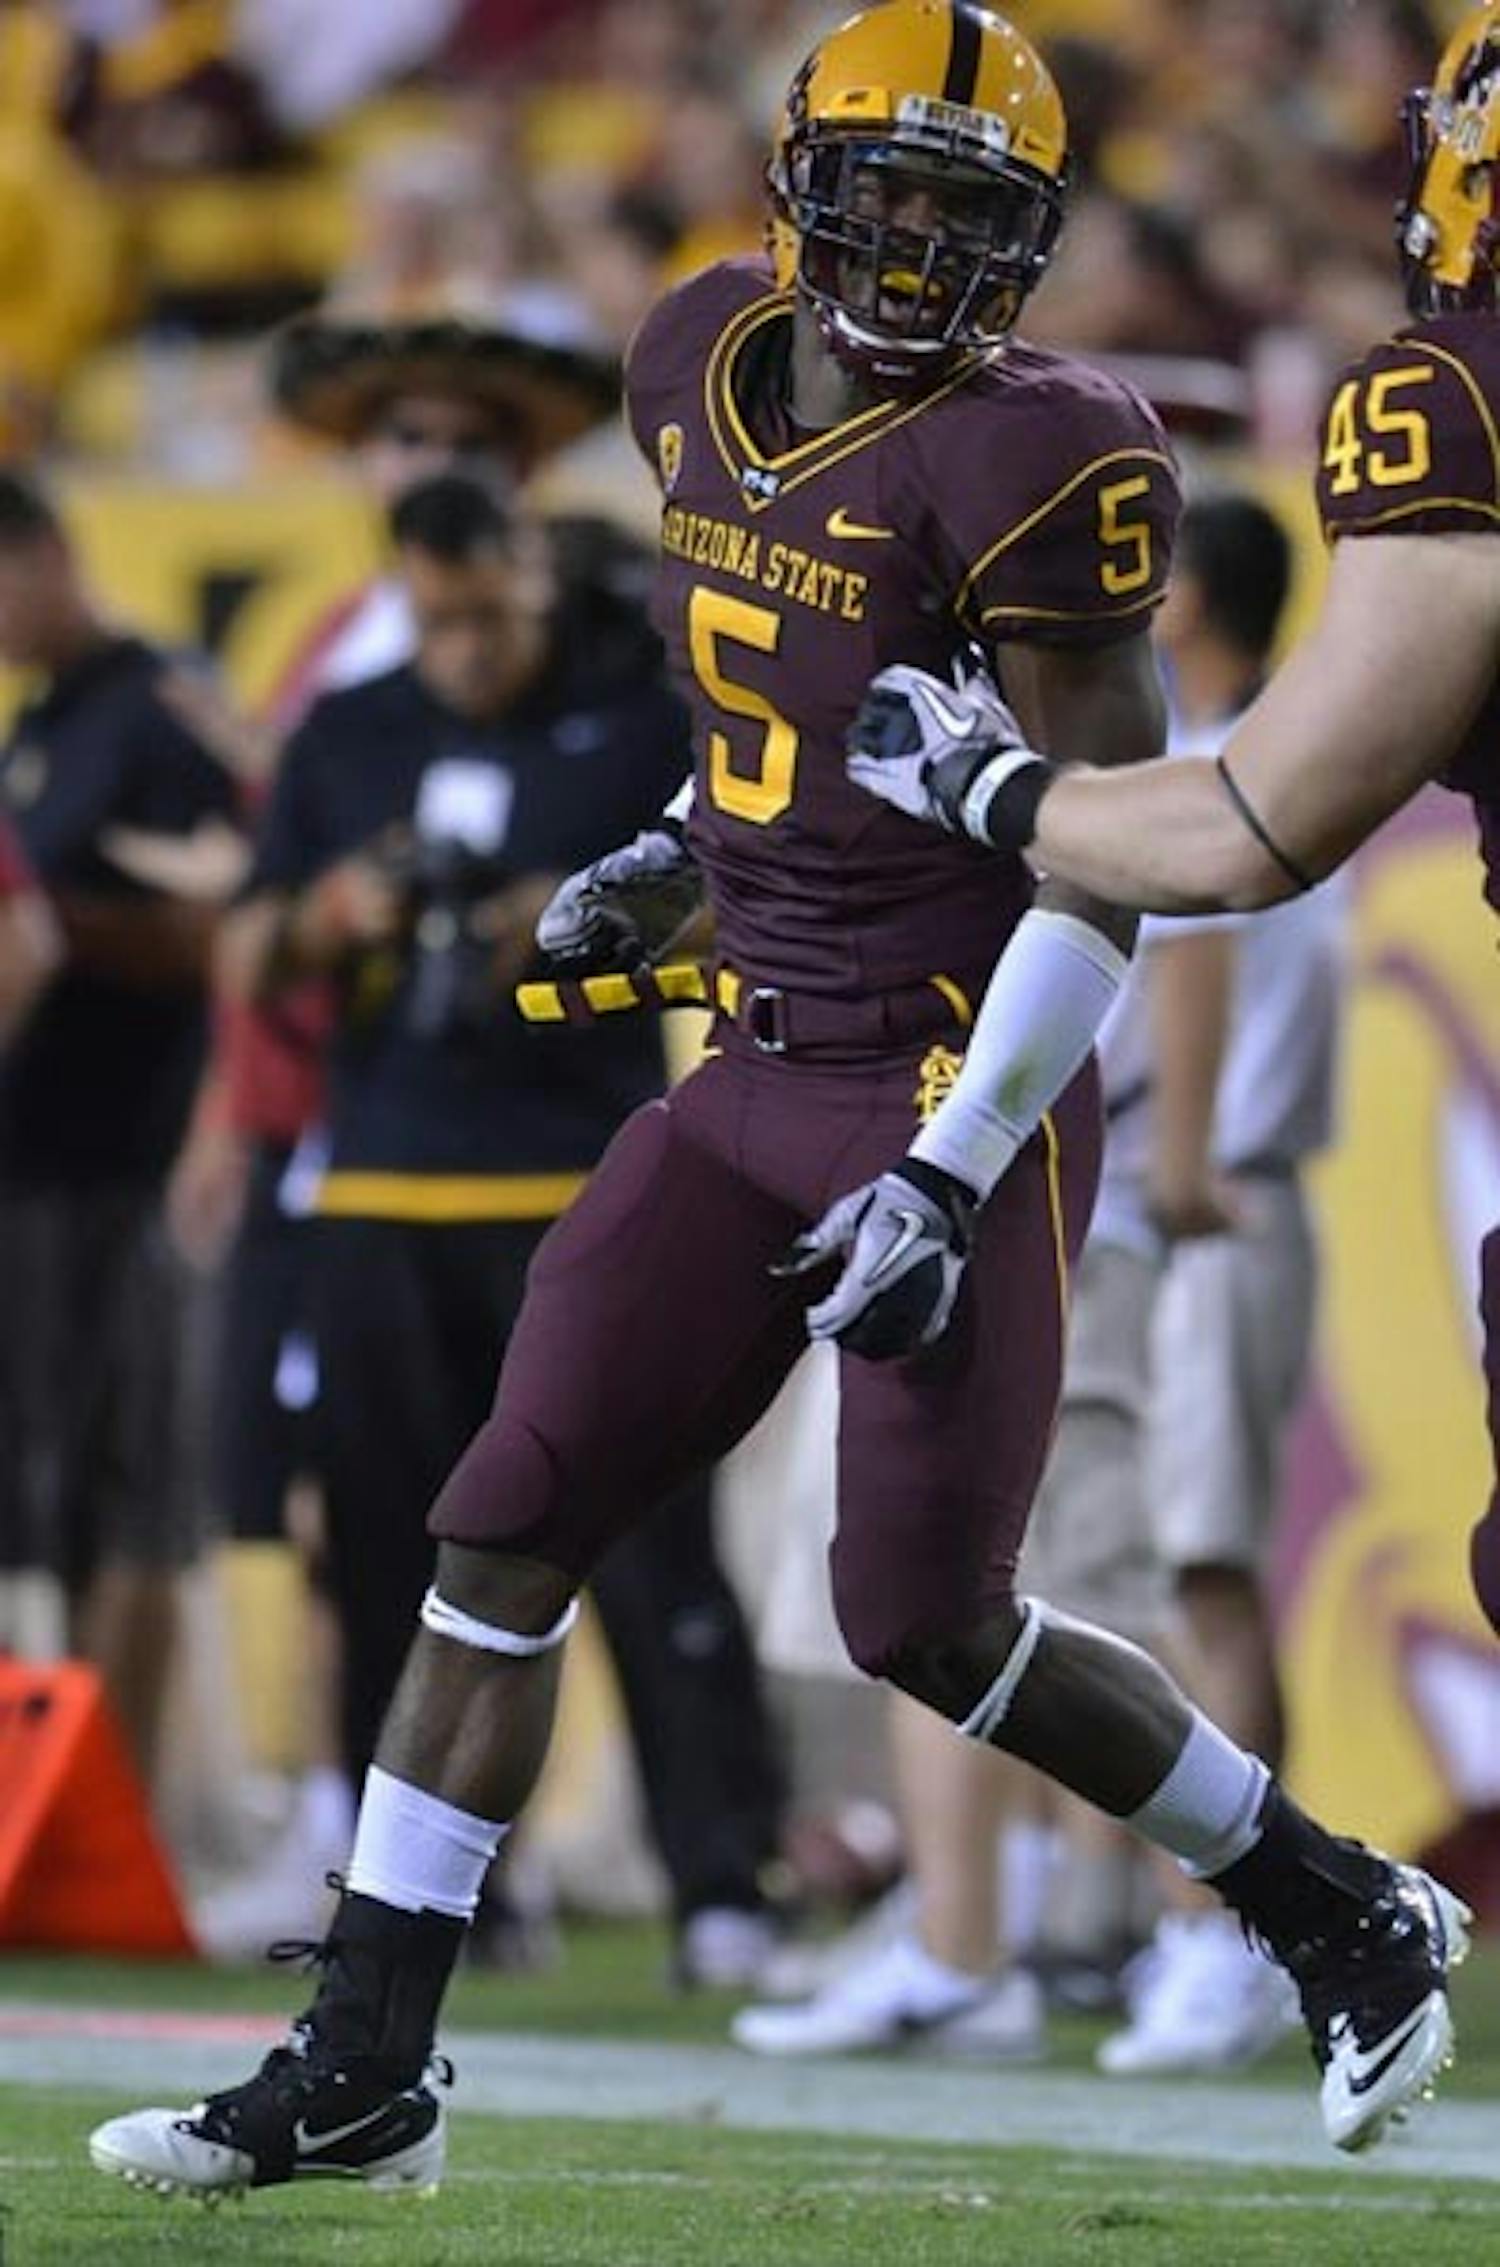 LOCKED DOWN: The secondary play of senior cornerback LeQuan Lewis, who had a big interception and nearly a second Saturday, powered the ASU defense to a shutout of pass-prone Washington State. (Photo by Aaron Lavinsky) 